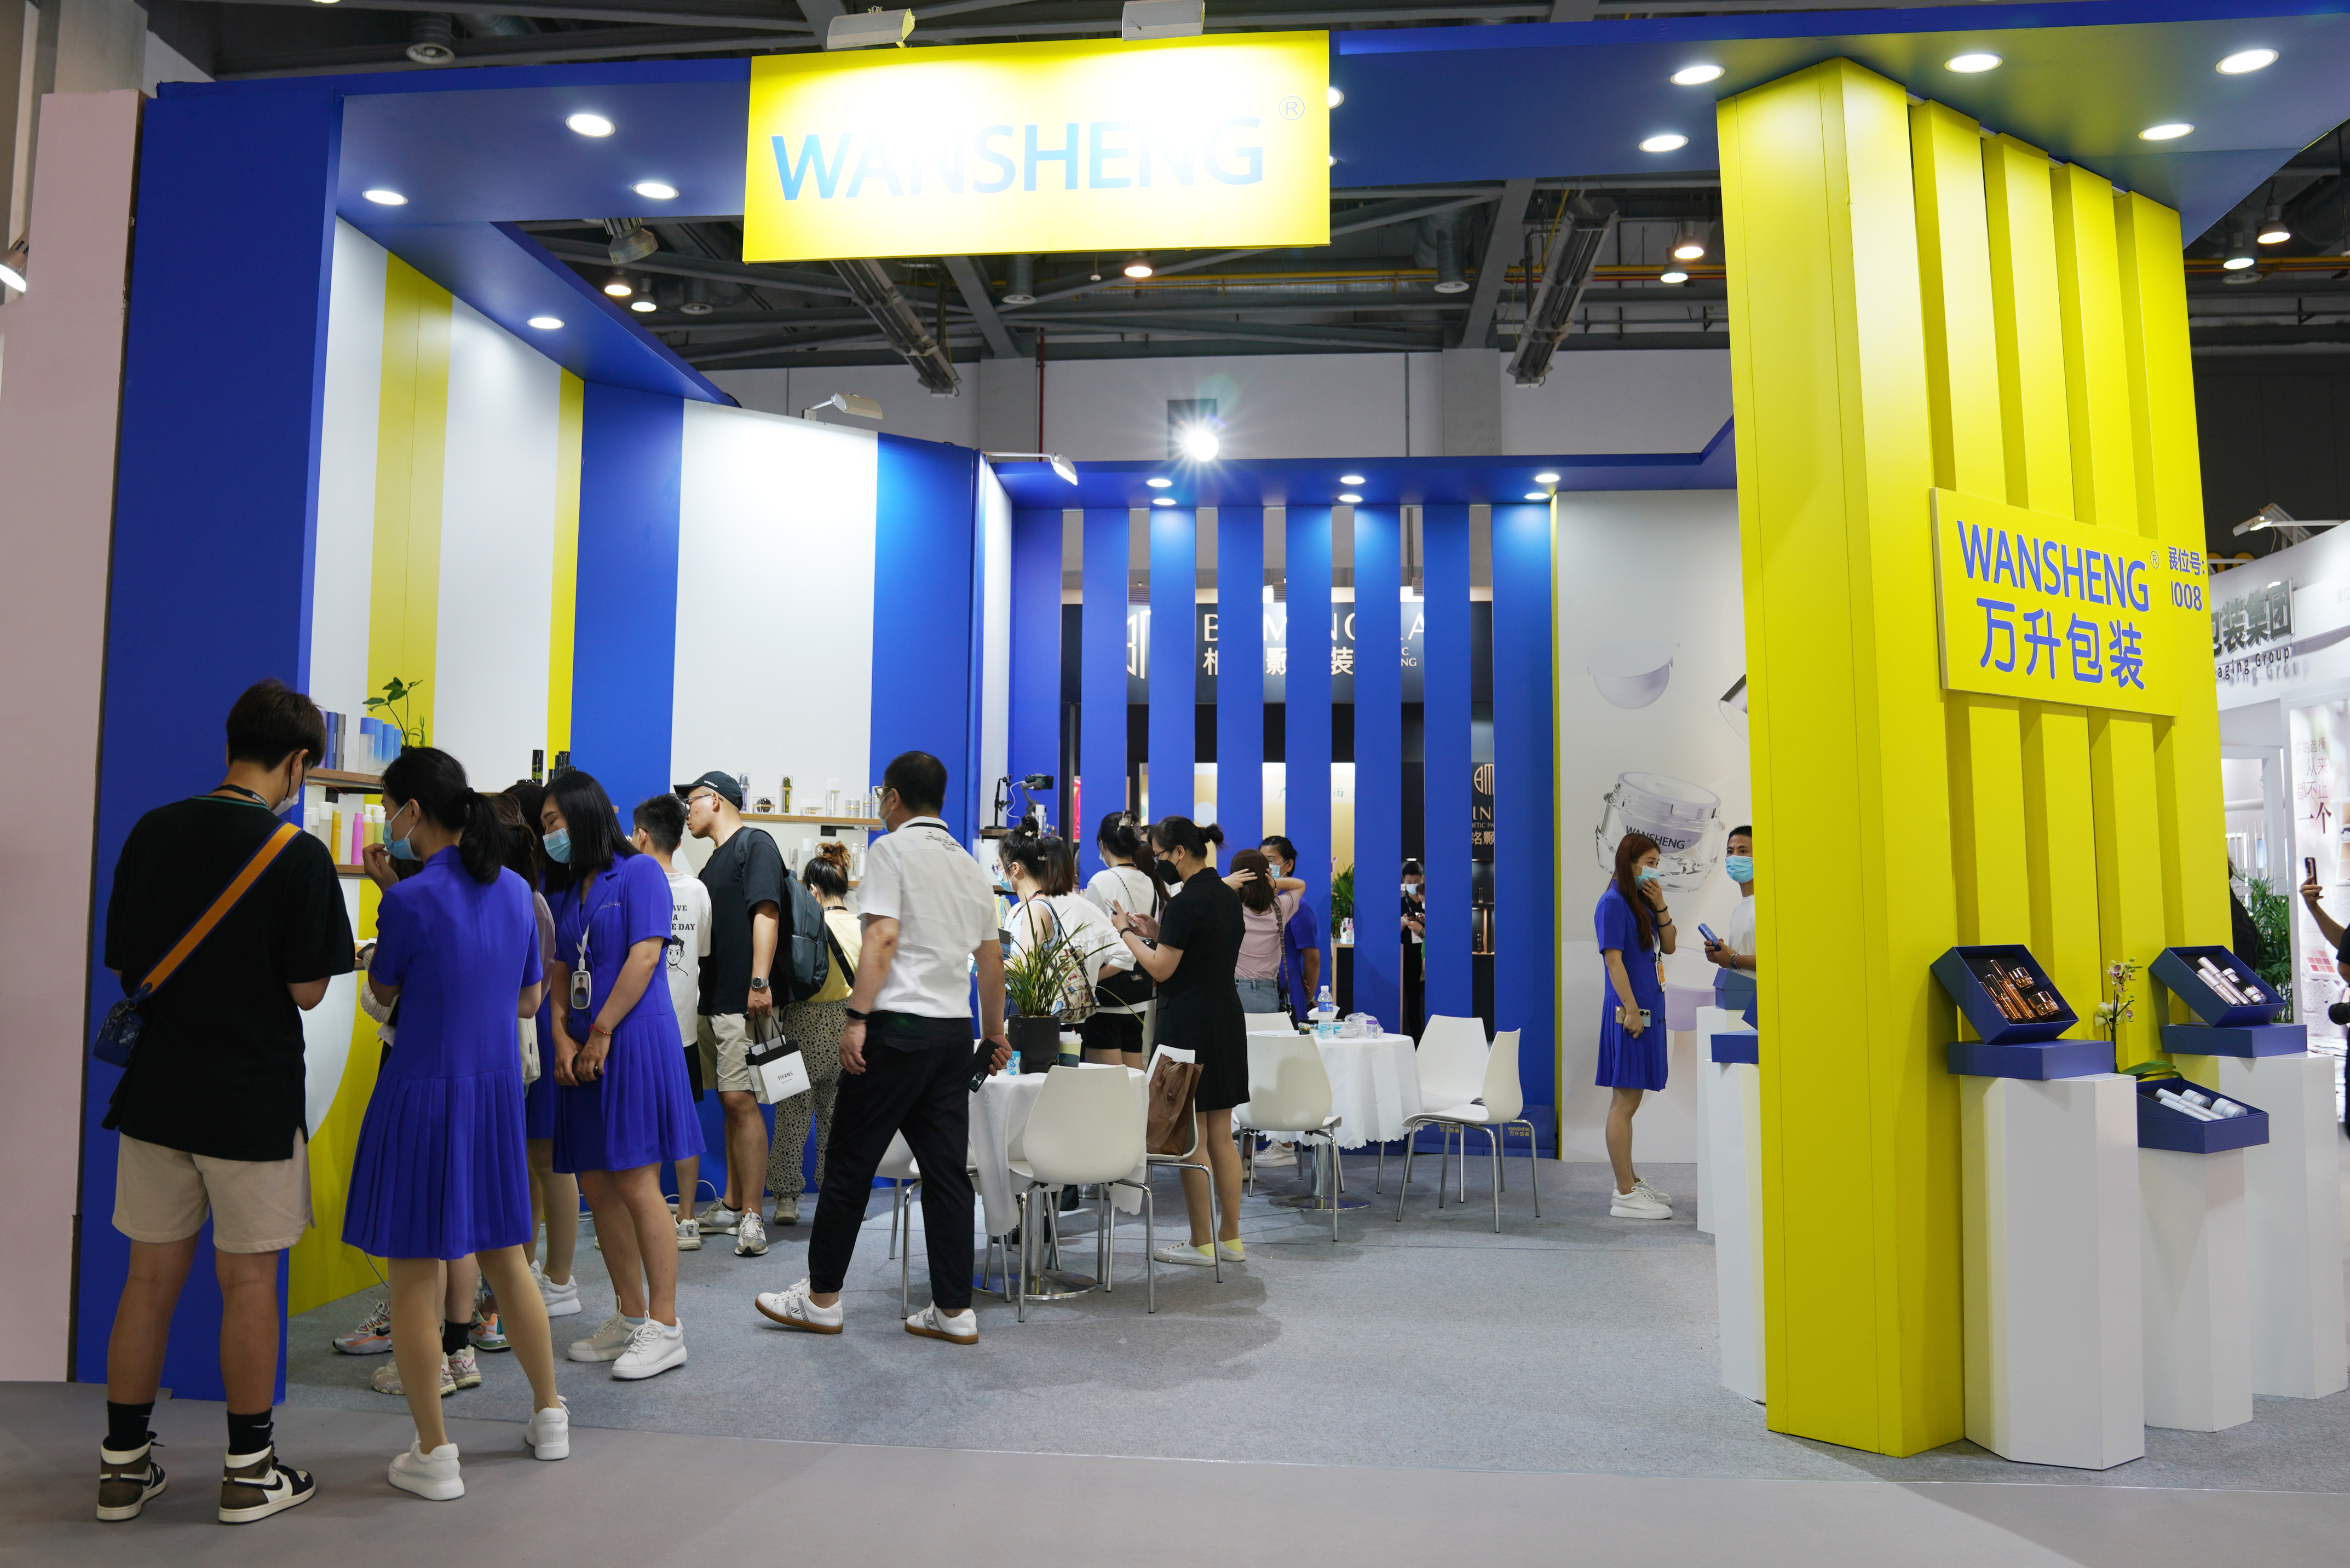 CIE Beauty Innovation Exhibition 丨 Wansheng New Product is on Display!